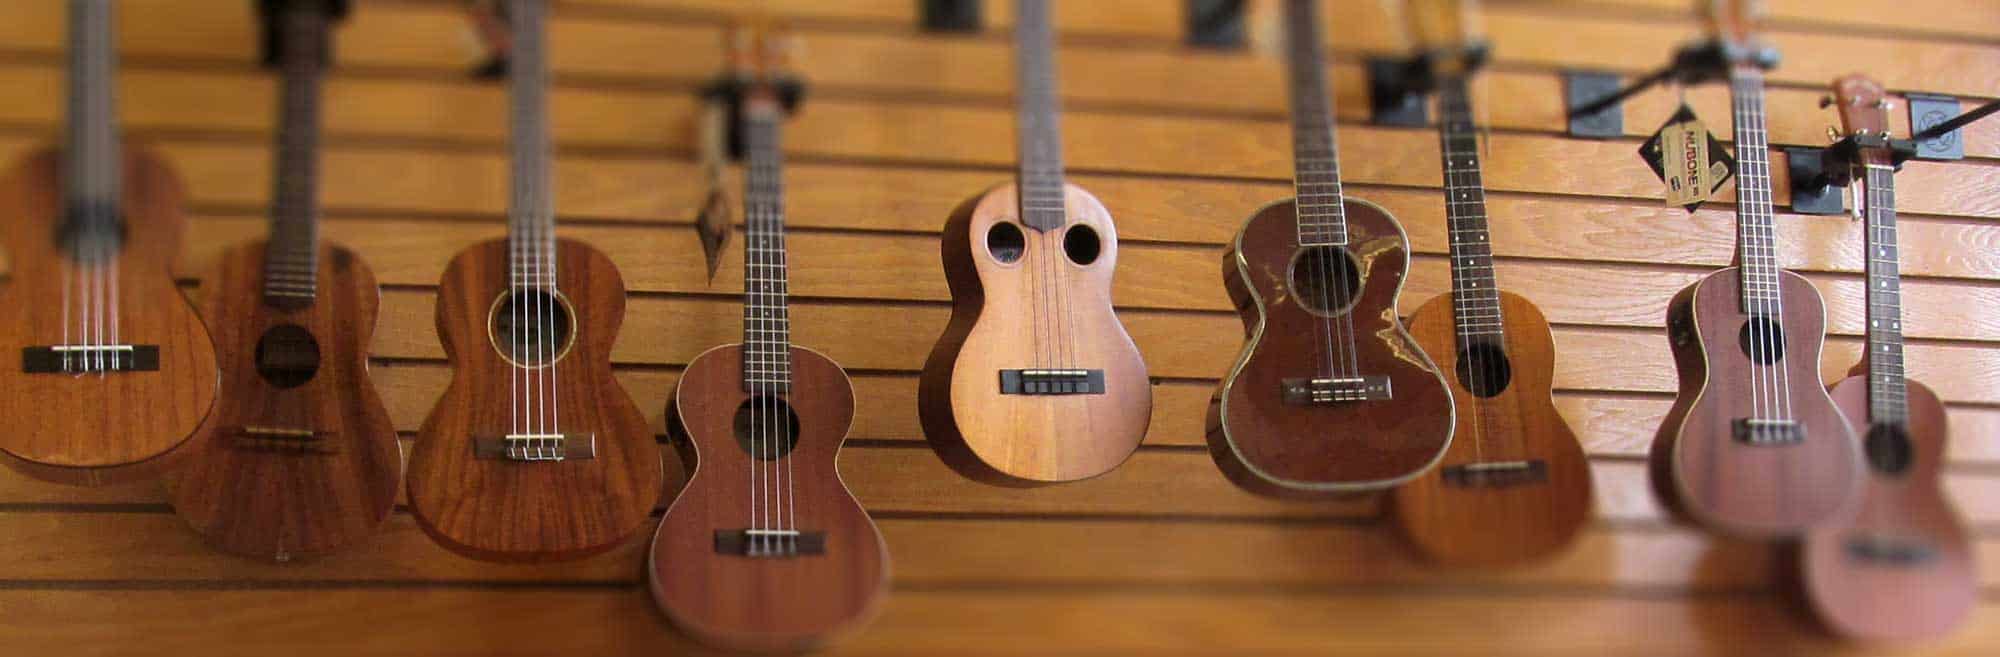 We have a great selection of fine ukuleles and classical instruments.